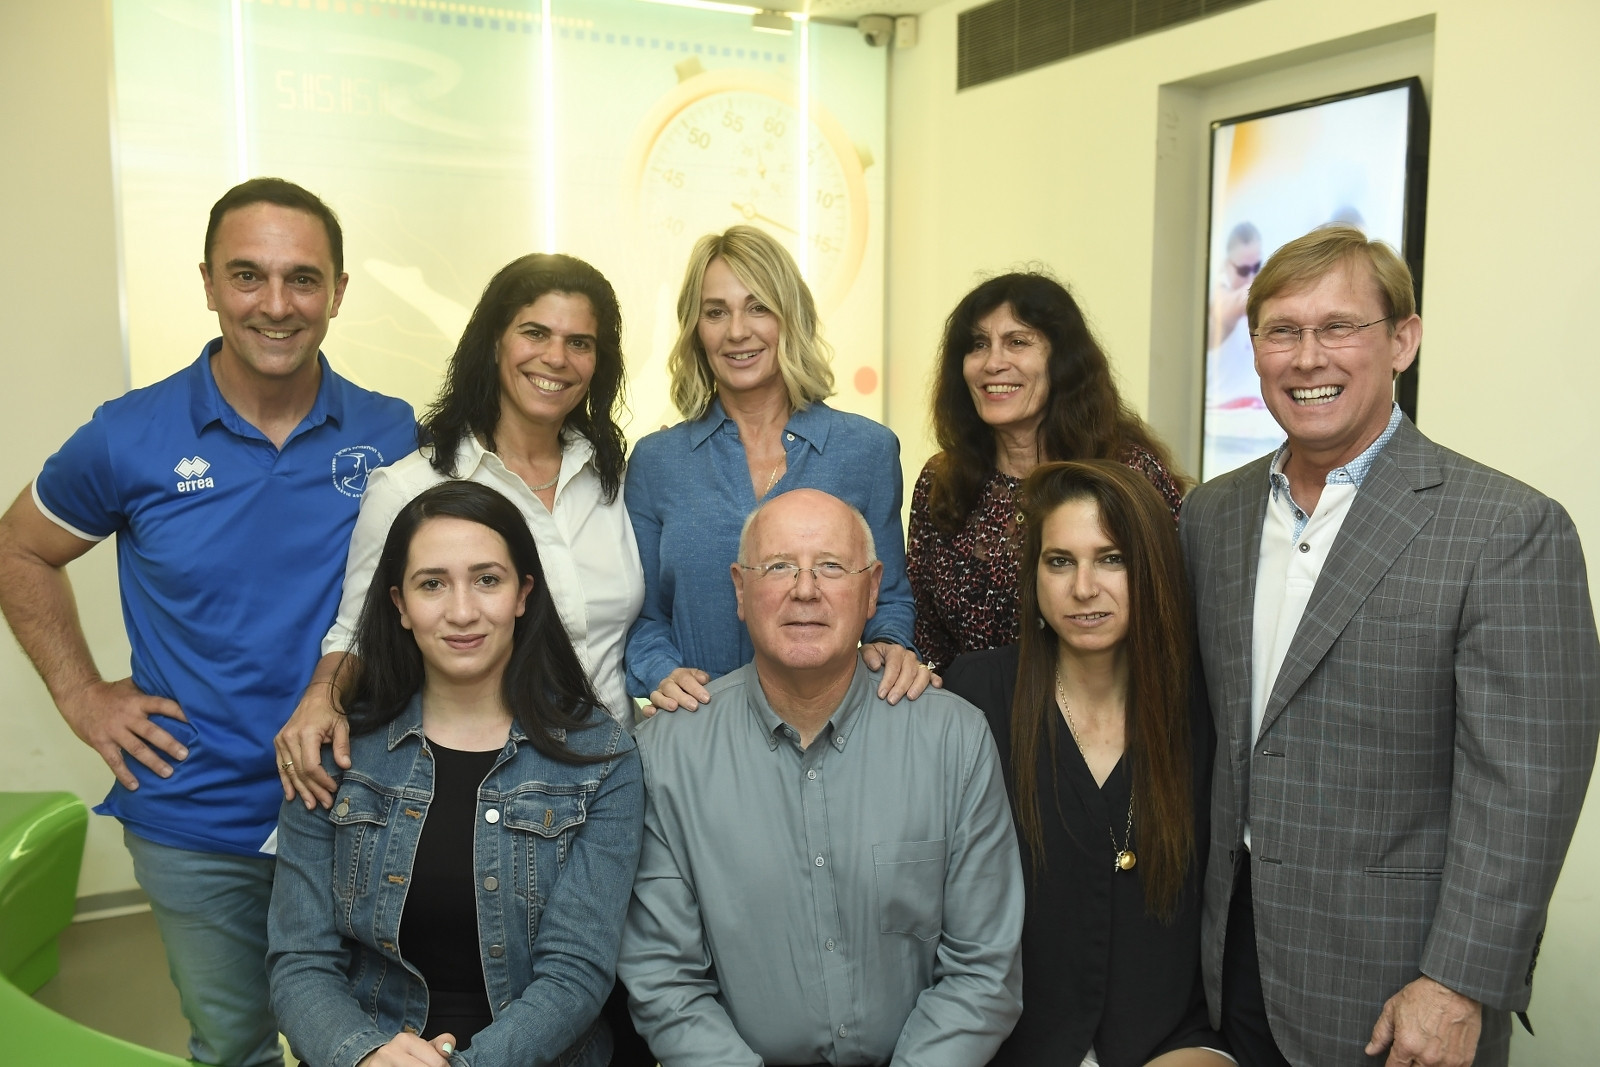 Legendary Romanian gymnast Comăneci visits Olympic Committee of Israel